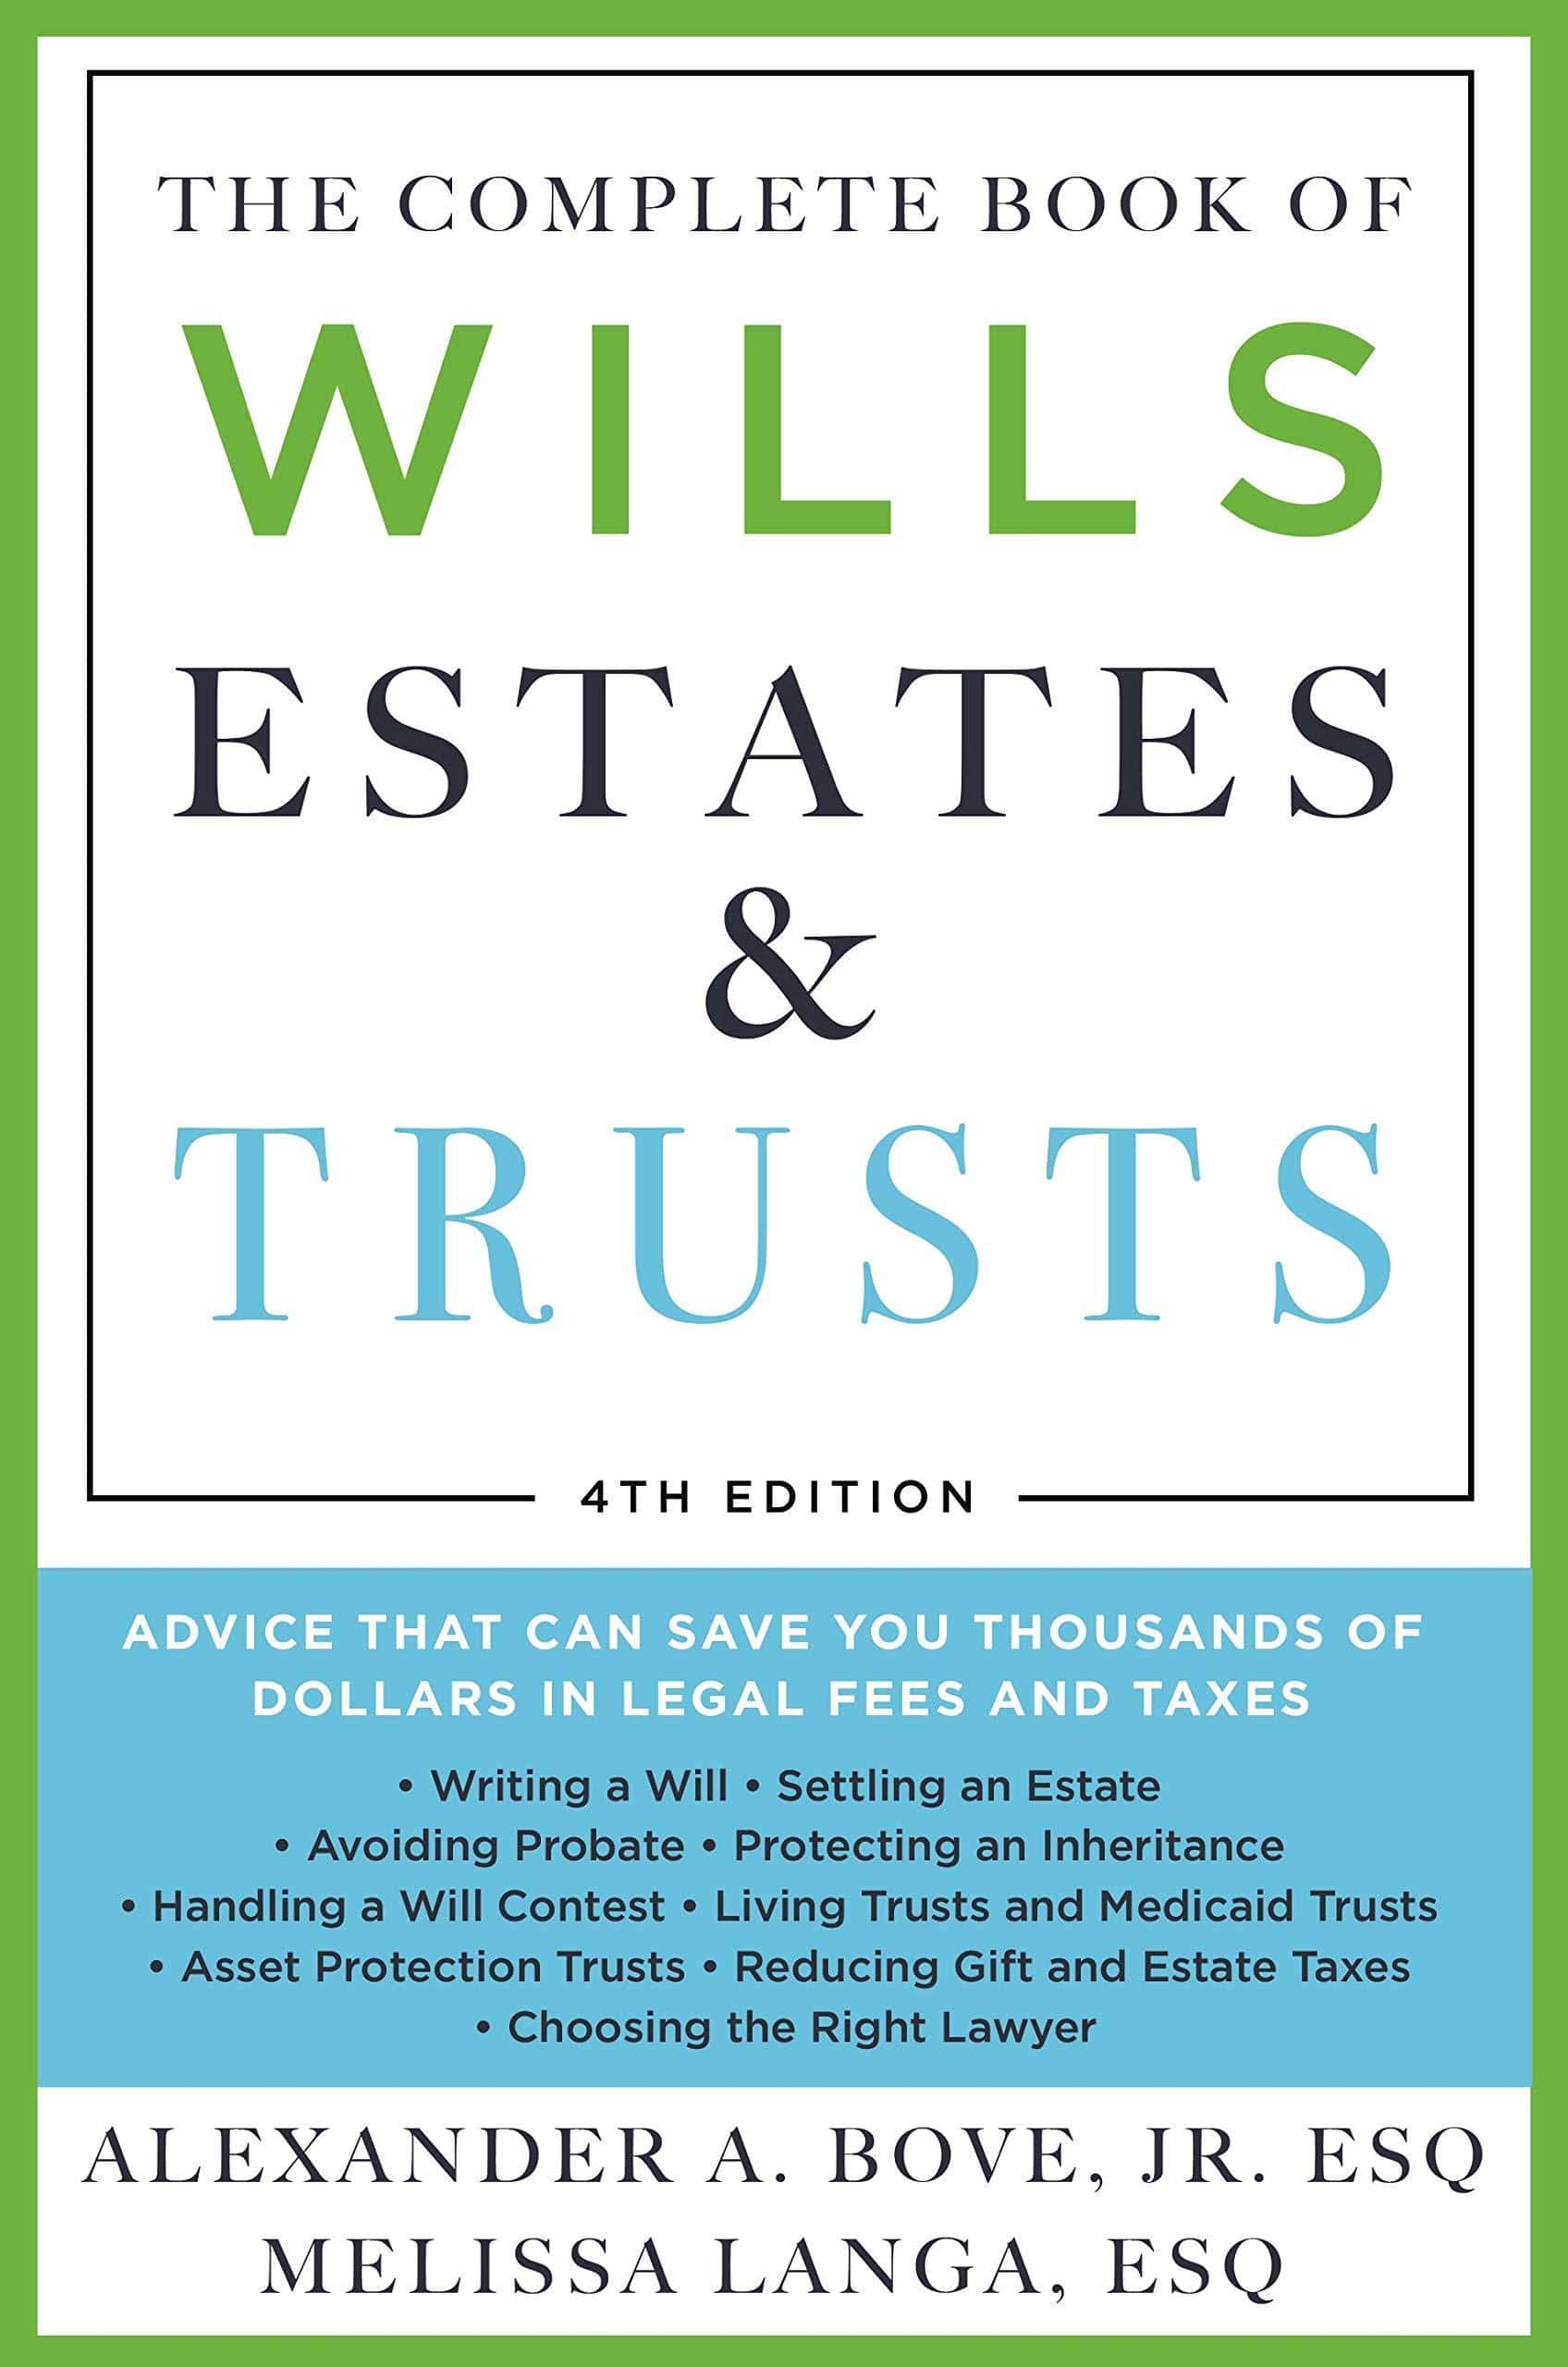 The Complete Book of Wills, Estates & Trusts (4th Edition) - SureShot Books Publishing LLC